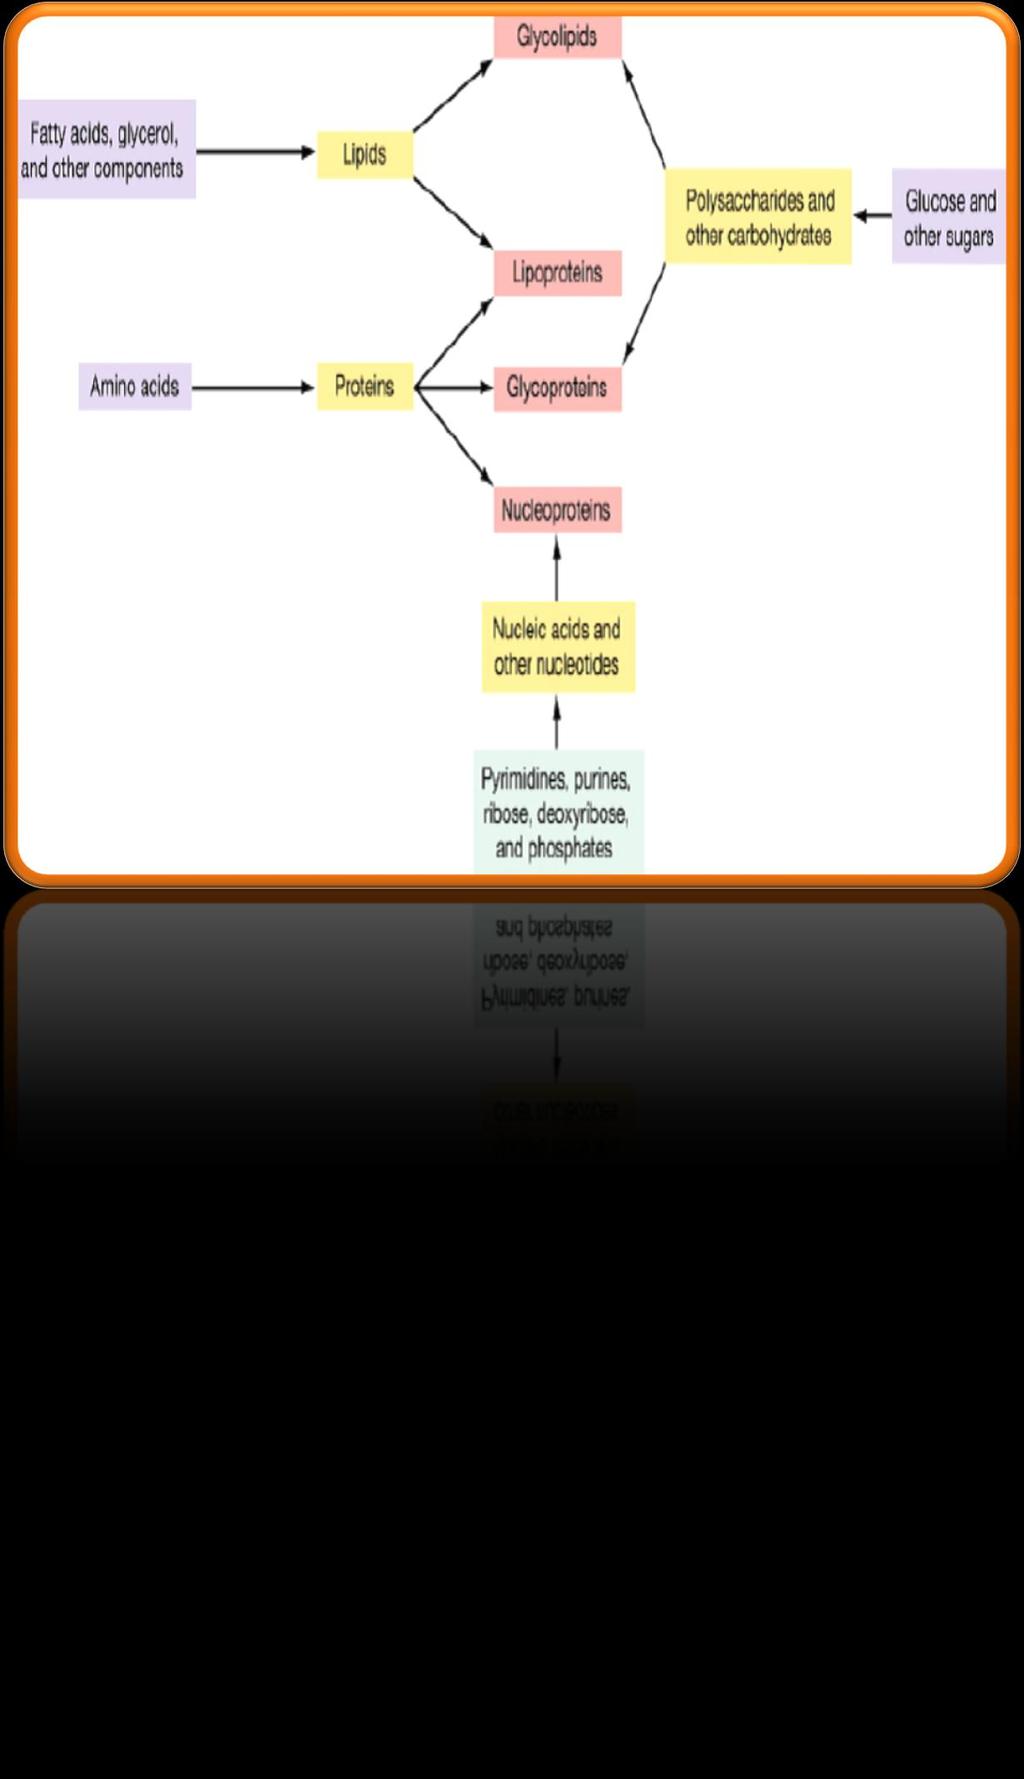 ANABOLISMS Biosynthesis pathway Assimilation process / synthesize complex or macro-molecules from